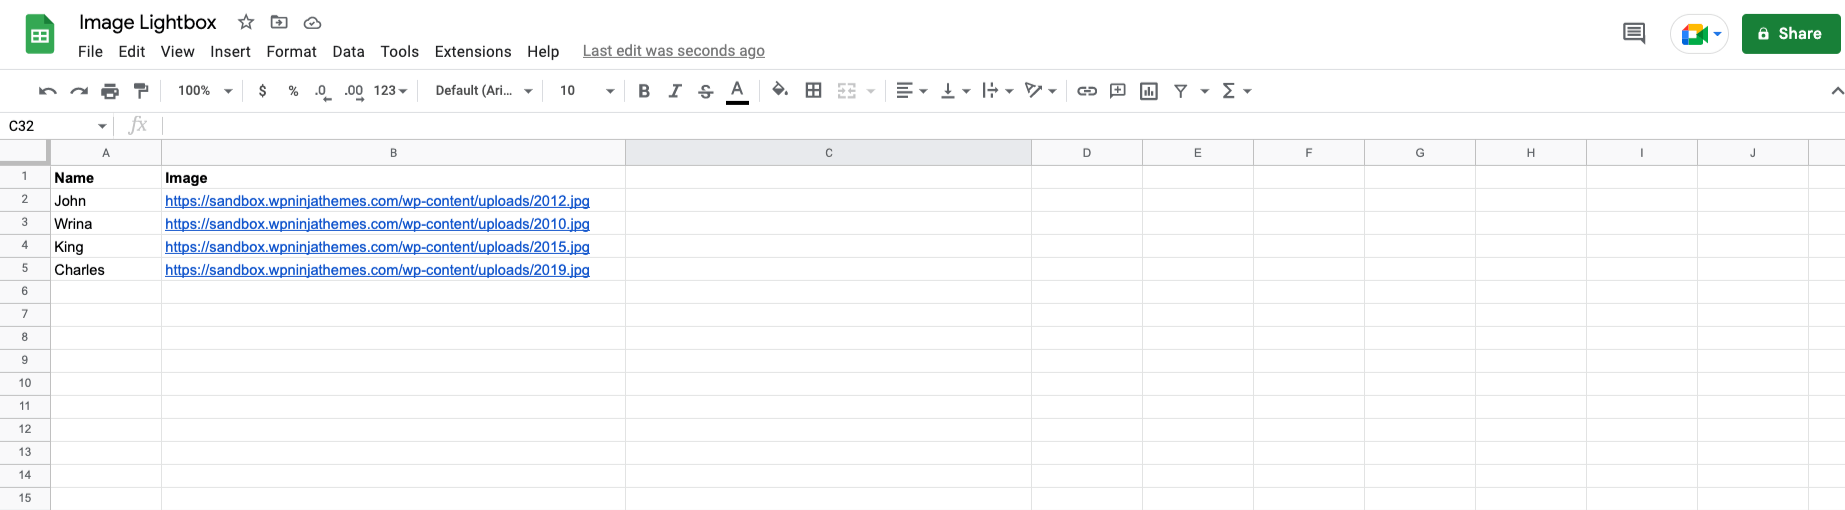 google sheets with link data